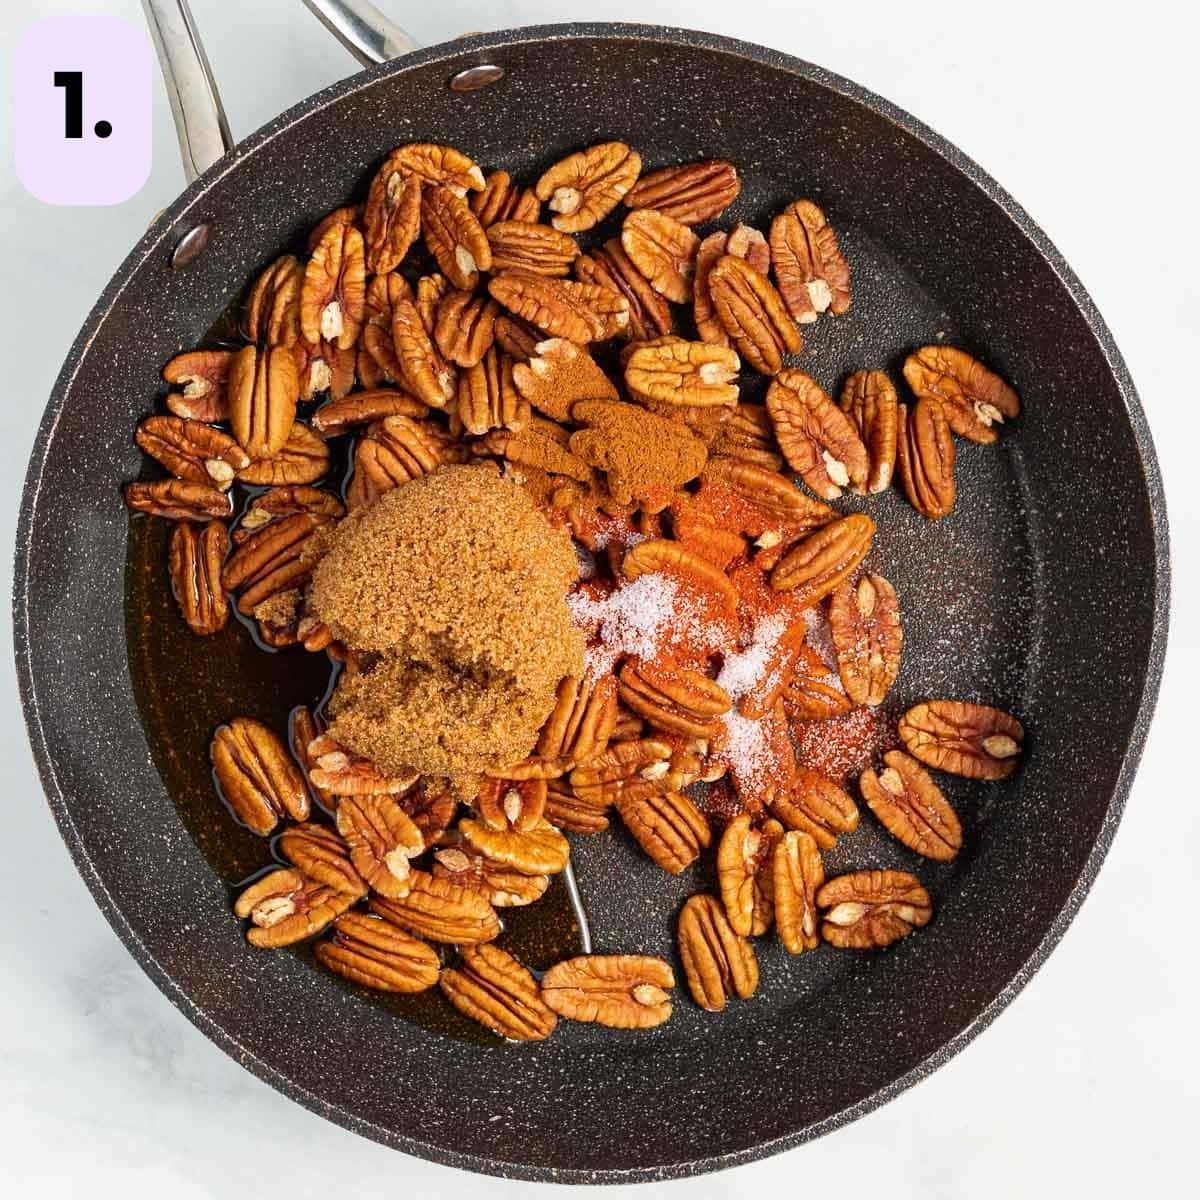 all of the candied pecan ingredients in a pan prior to cooking